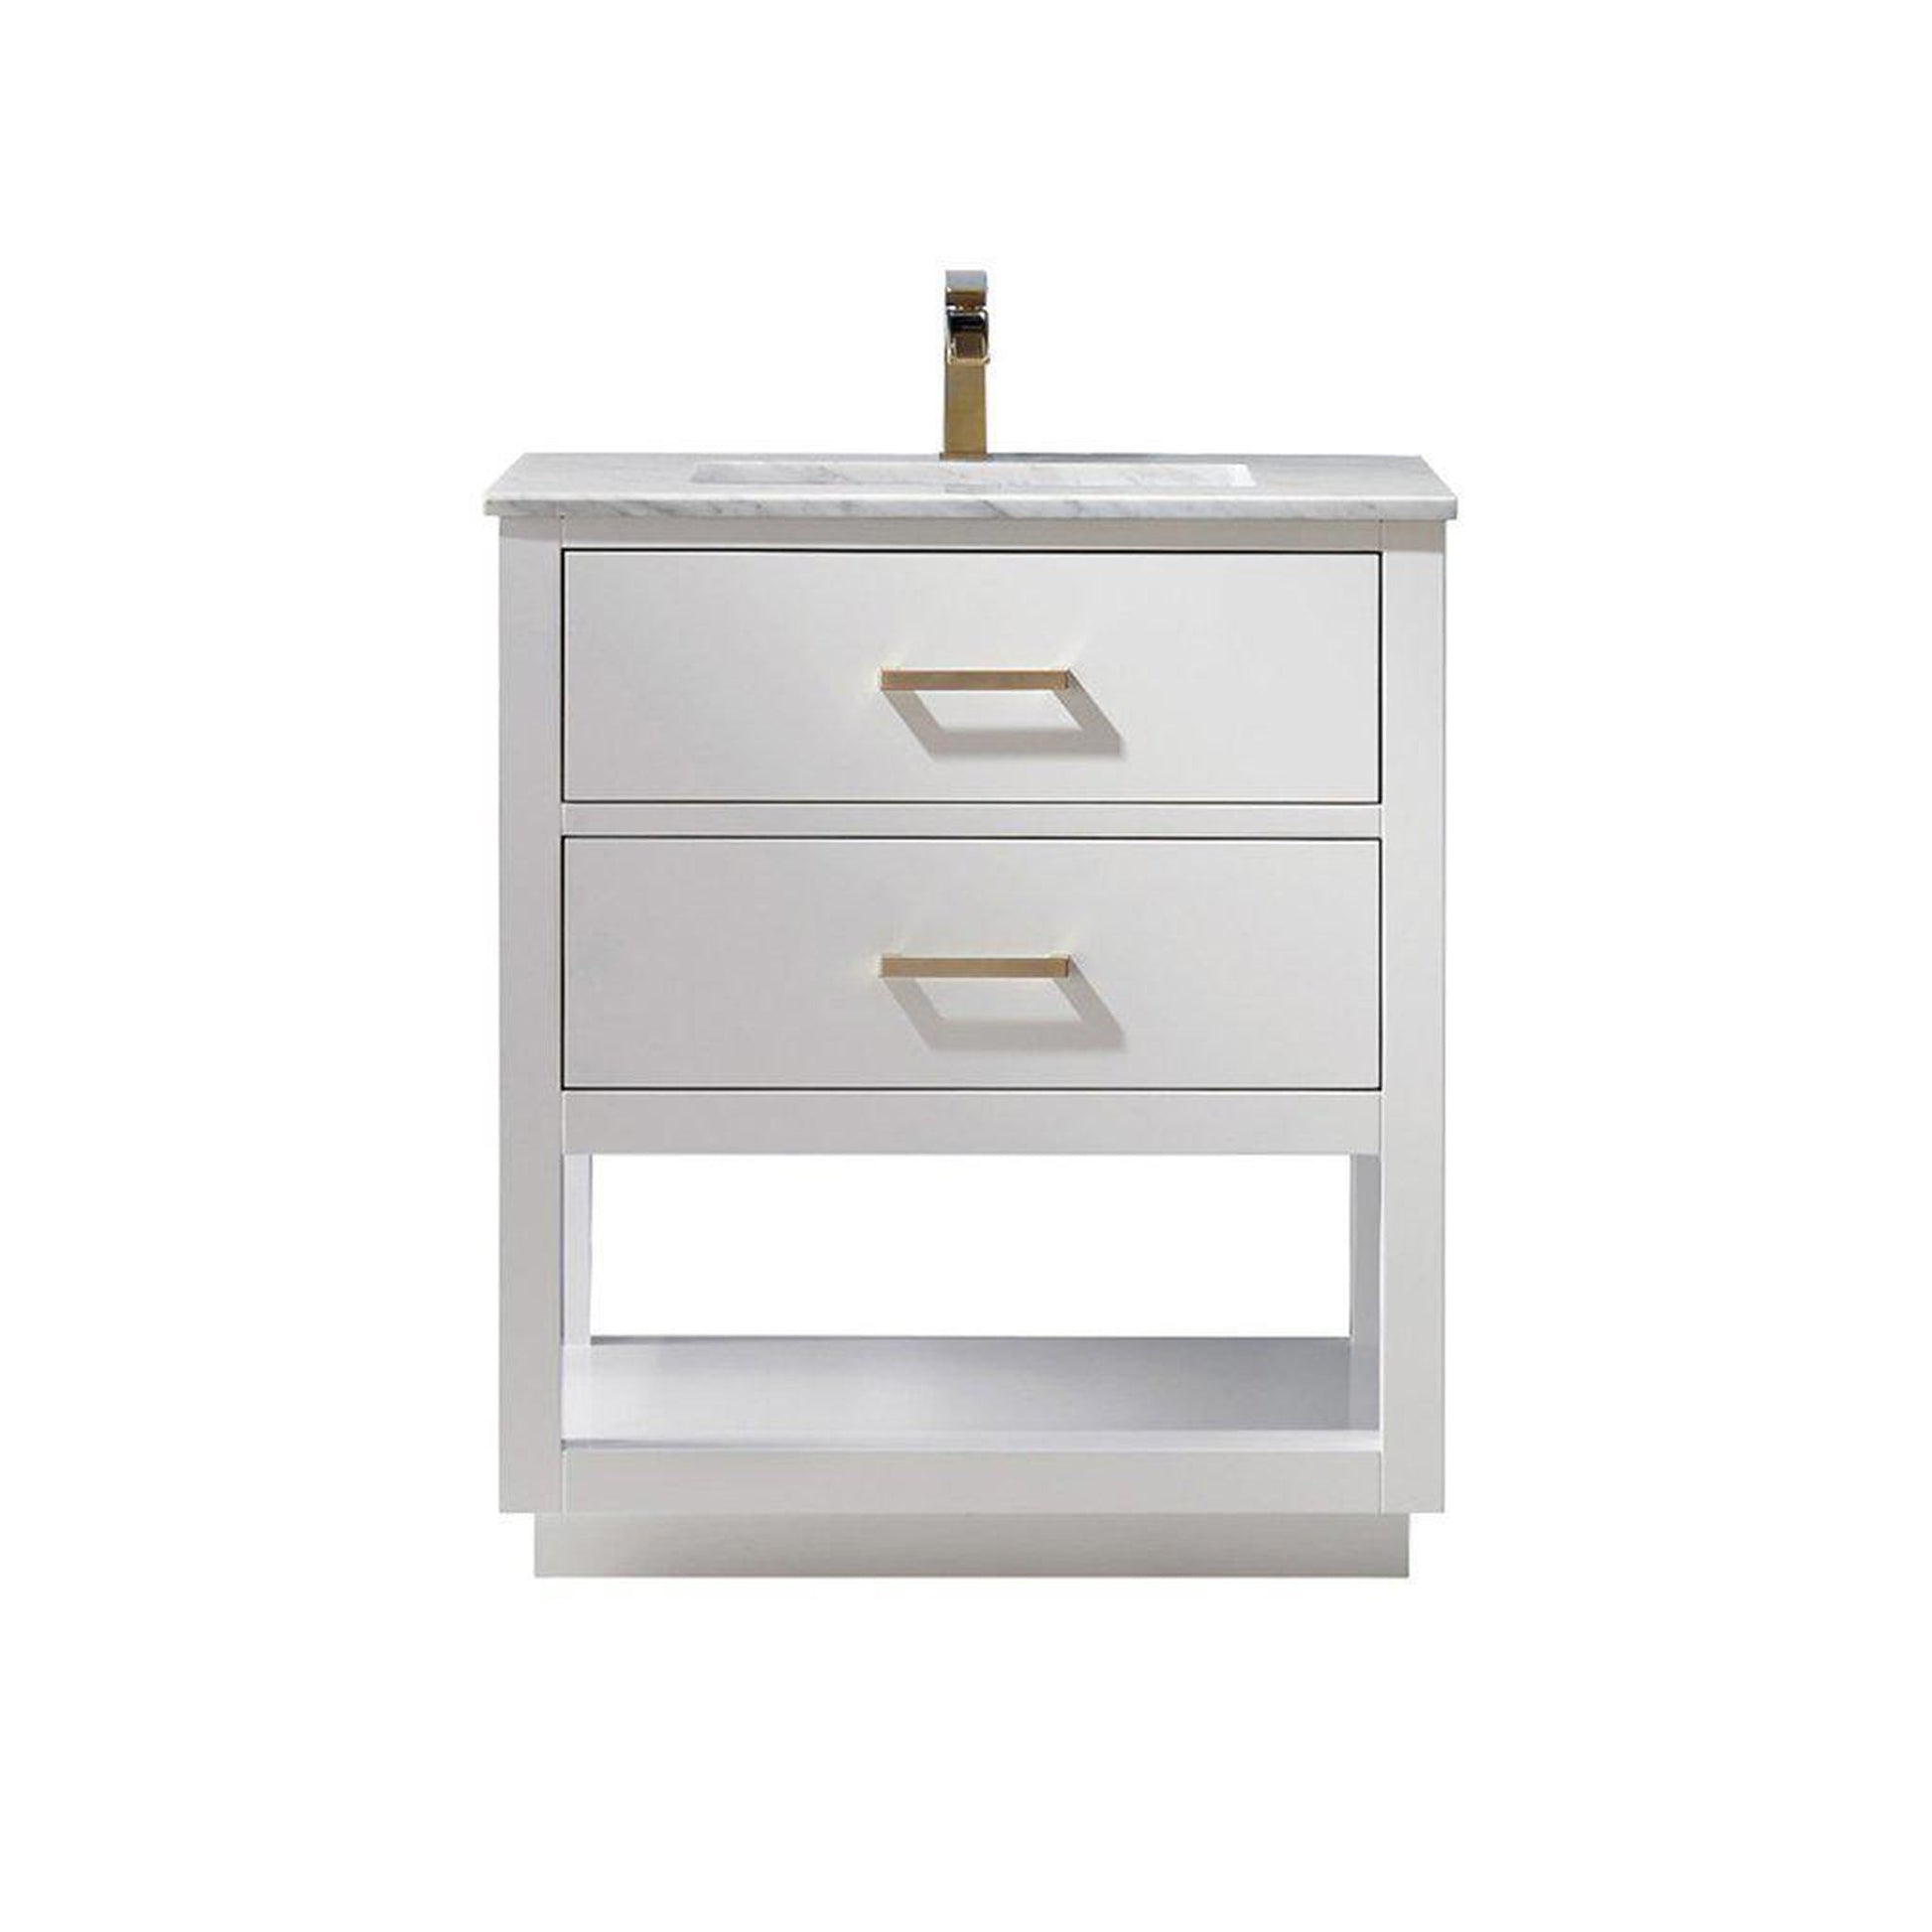 Altair Remi 30" Single White Freestanding Bathroom Vanity Set With Natural Carrara White Marble Top, Rectangular Undermount Ceramic Sink, and Overflow